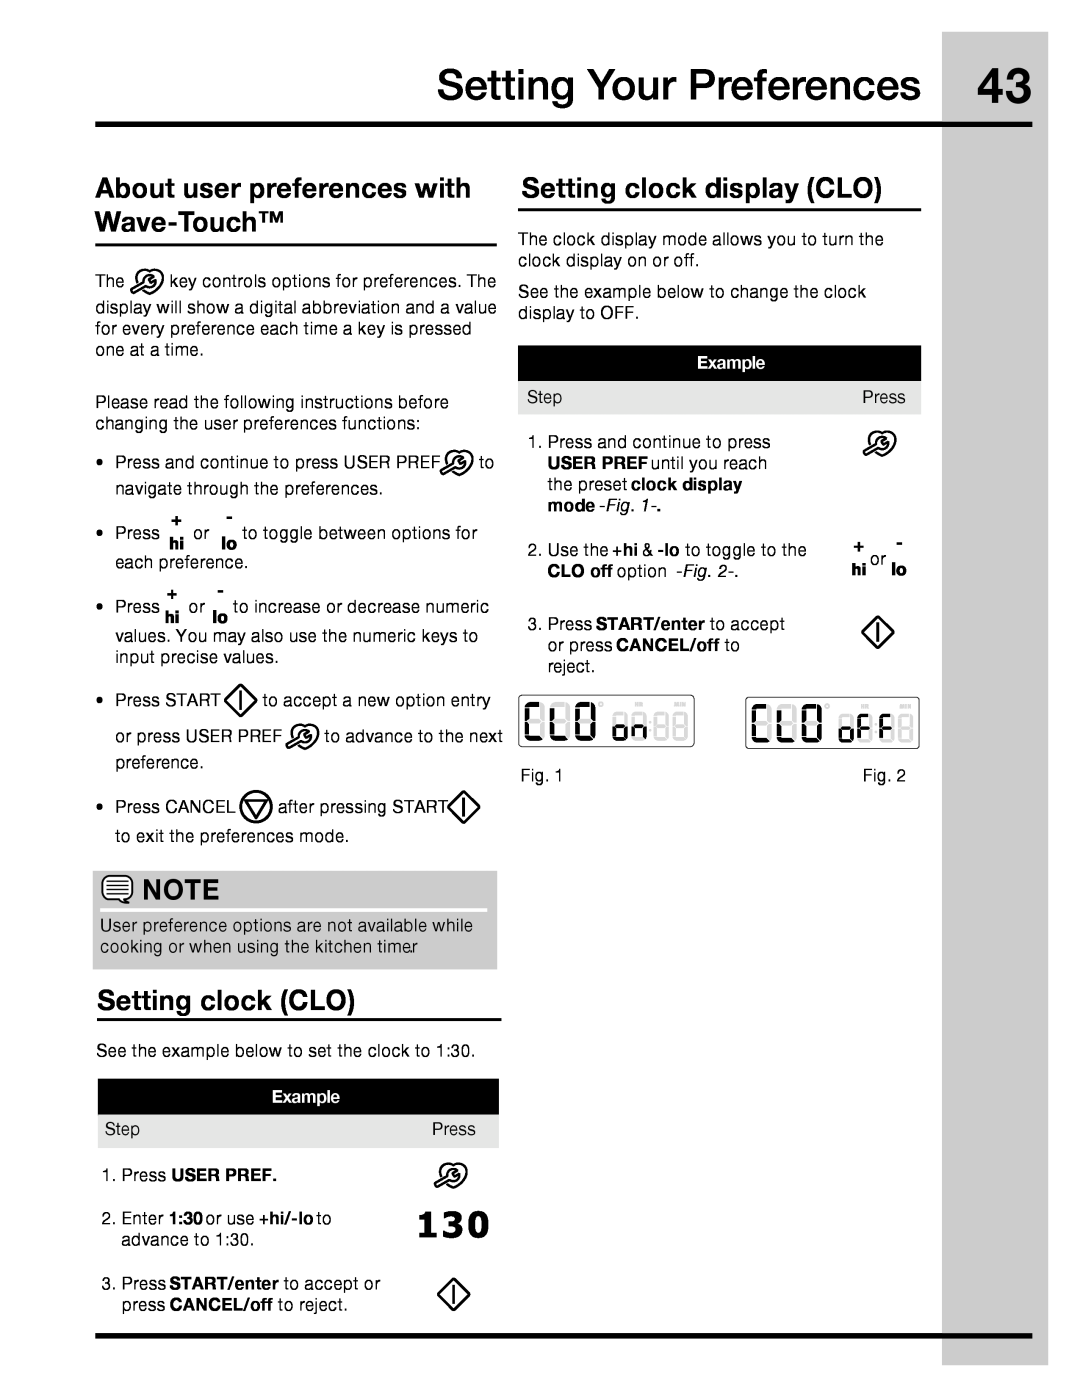 Electrolux 316471113 Setting Your Preferences, About user preferences with Wave-Touch, Setting clock display CLO, Example 